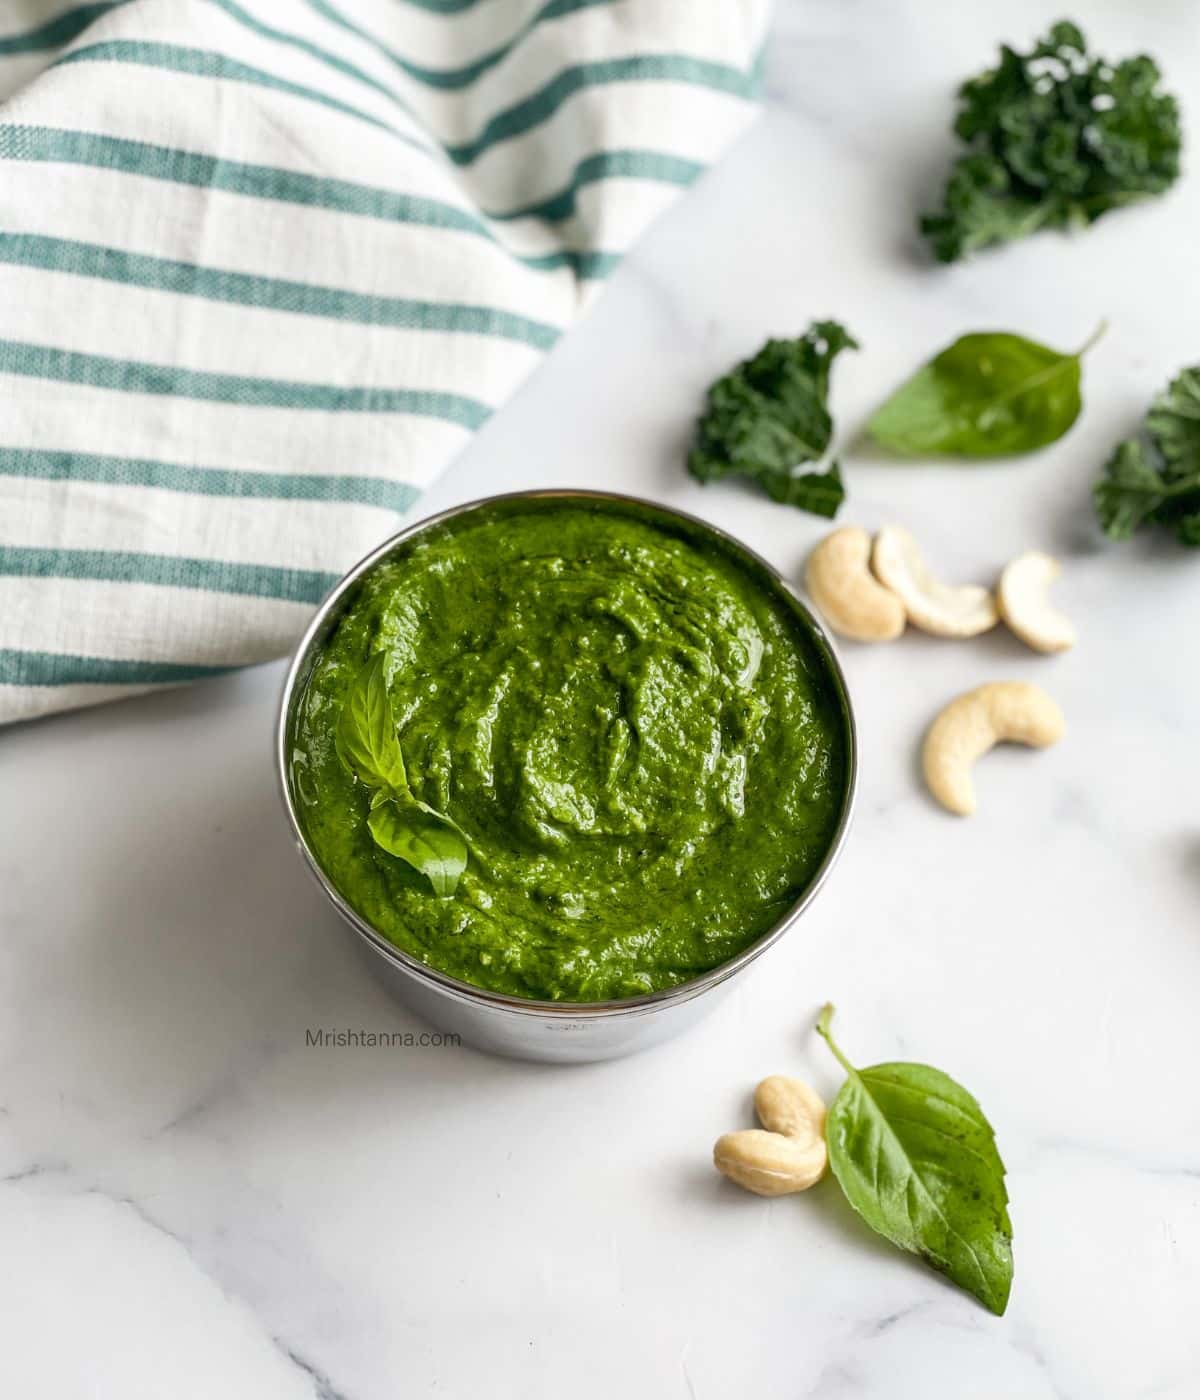 A bowl of kale cashew pesto is on the table.